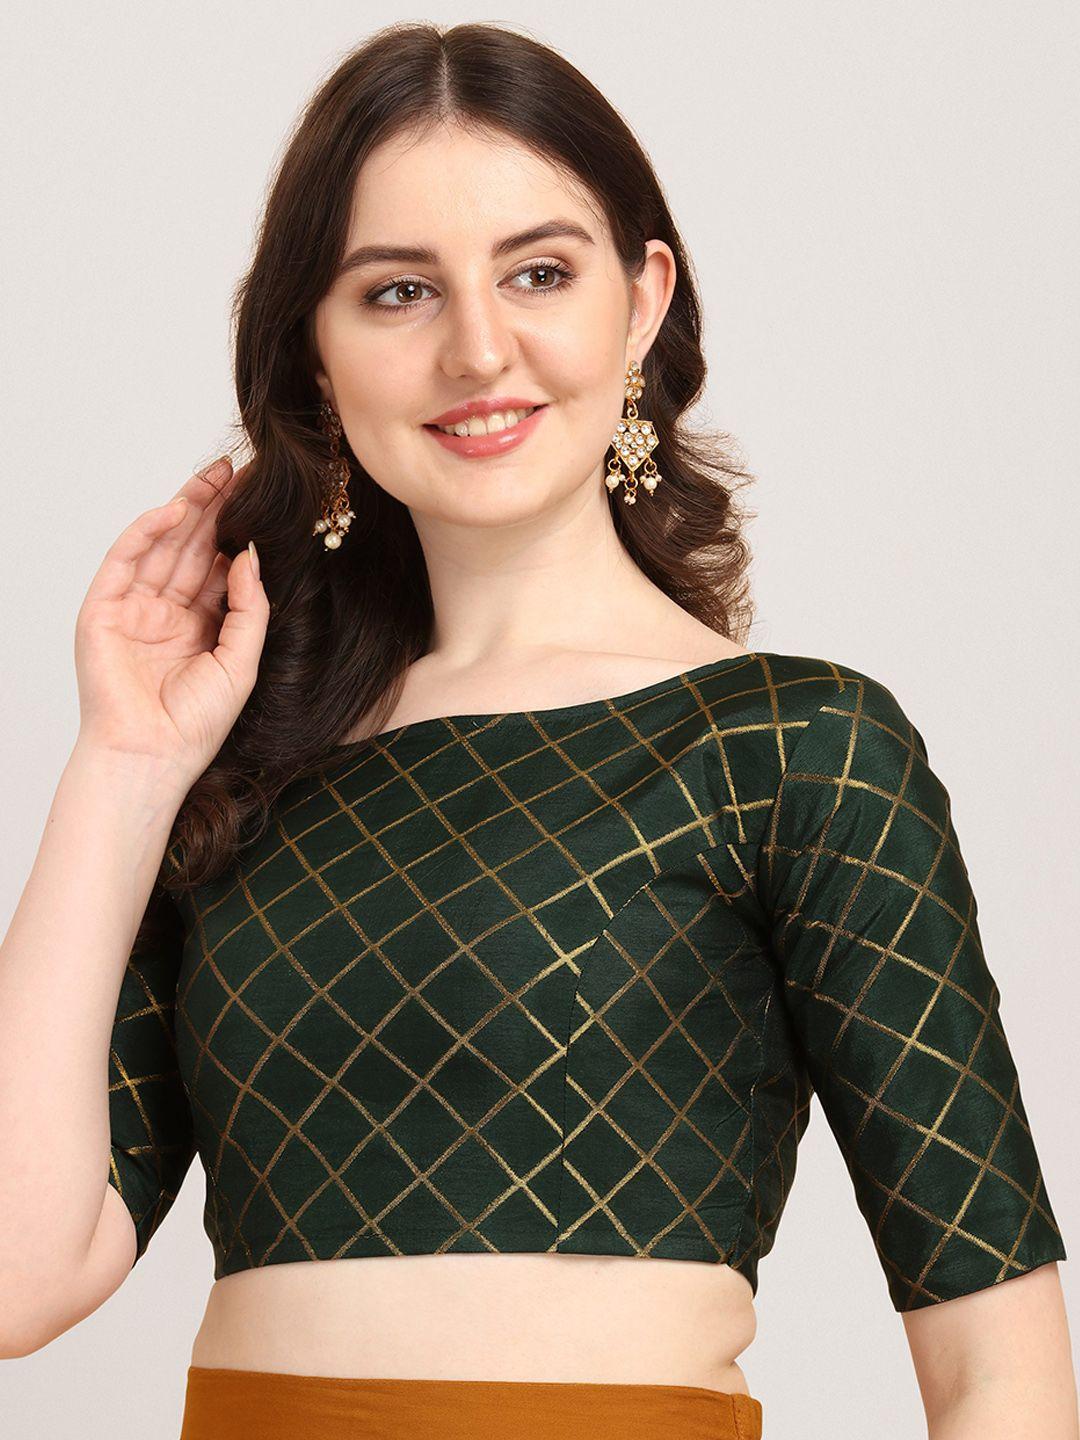 oomph! hecked boat neck saree blouse